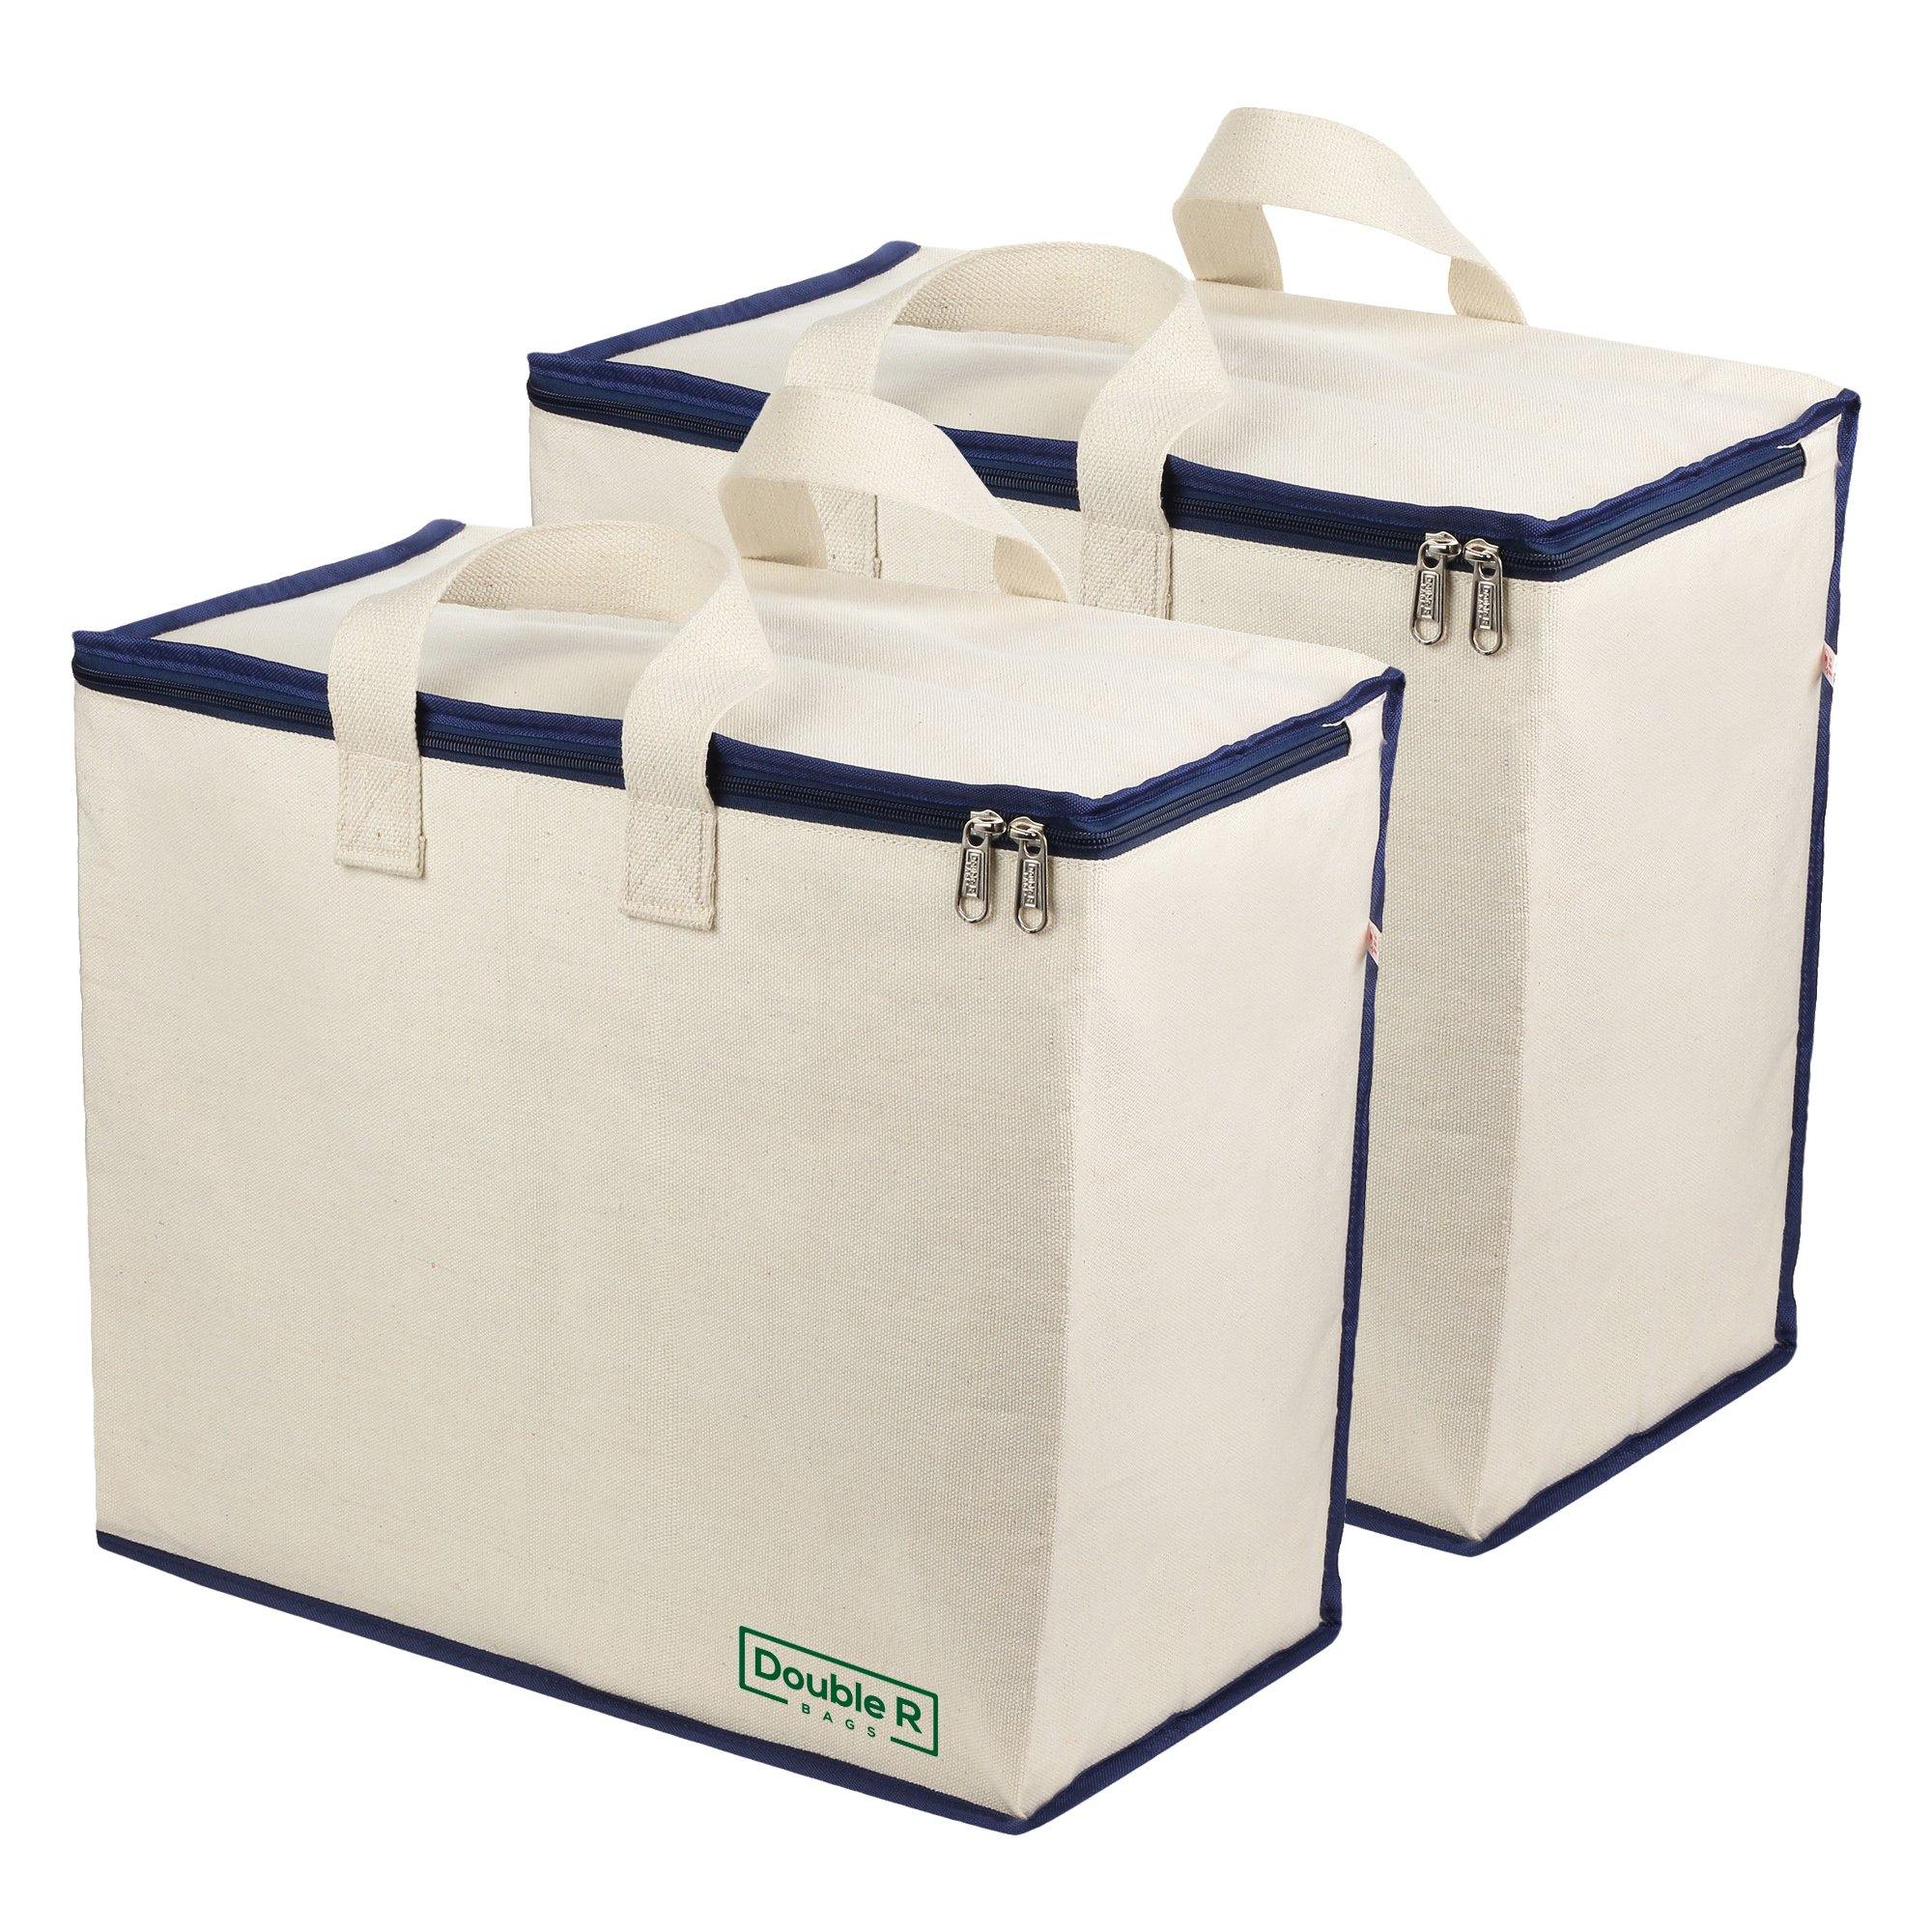 DOUBLE R BAGS Canvas Bag with Cotton Handles and Covers Zip Bags Pack Of 2 (Navy Blue)